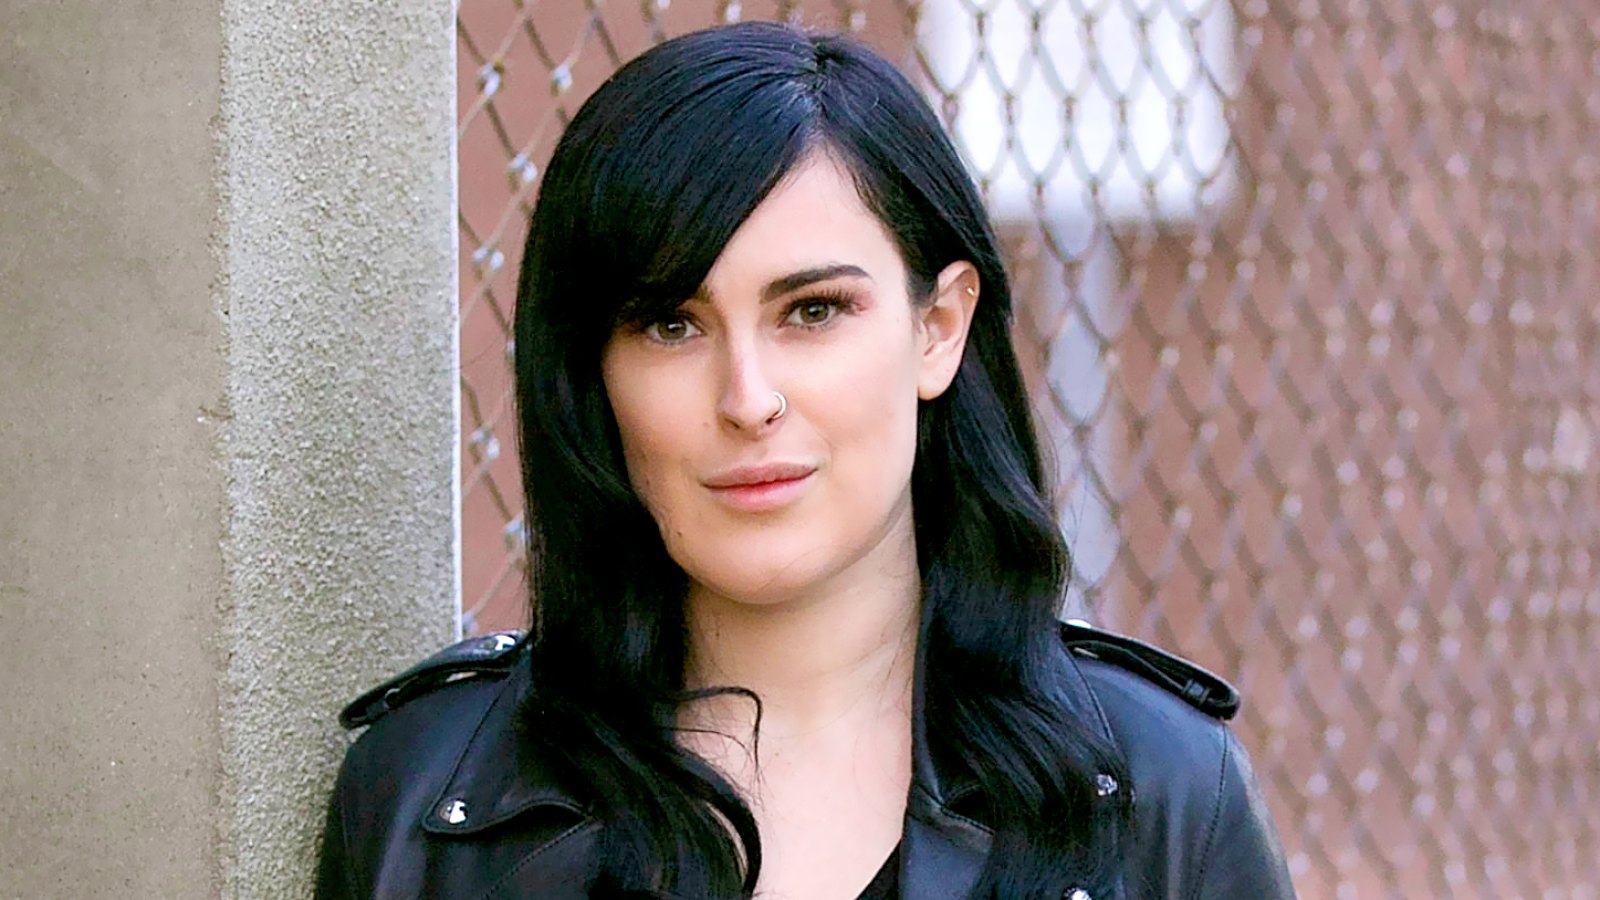 Rumer Willis poses for a portrait at "The Unauthorized Musical Parody of The Devil Wears Prada" at Rockwell Table & Stage on April 22, 2016 in Los Angeles, California.